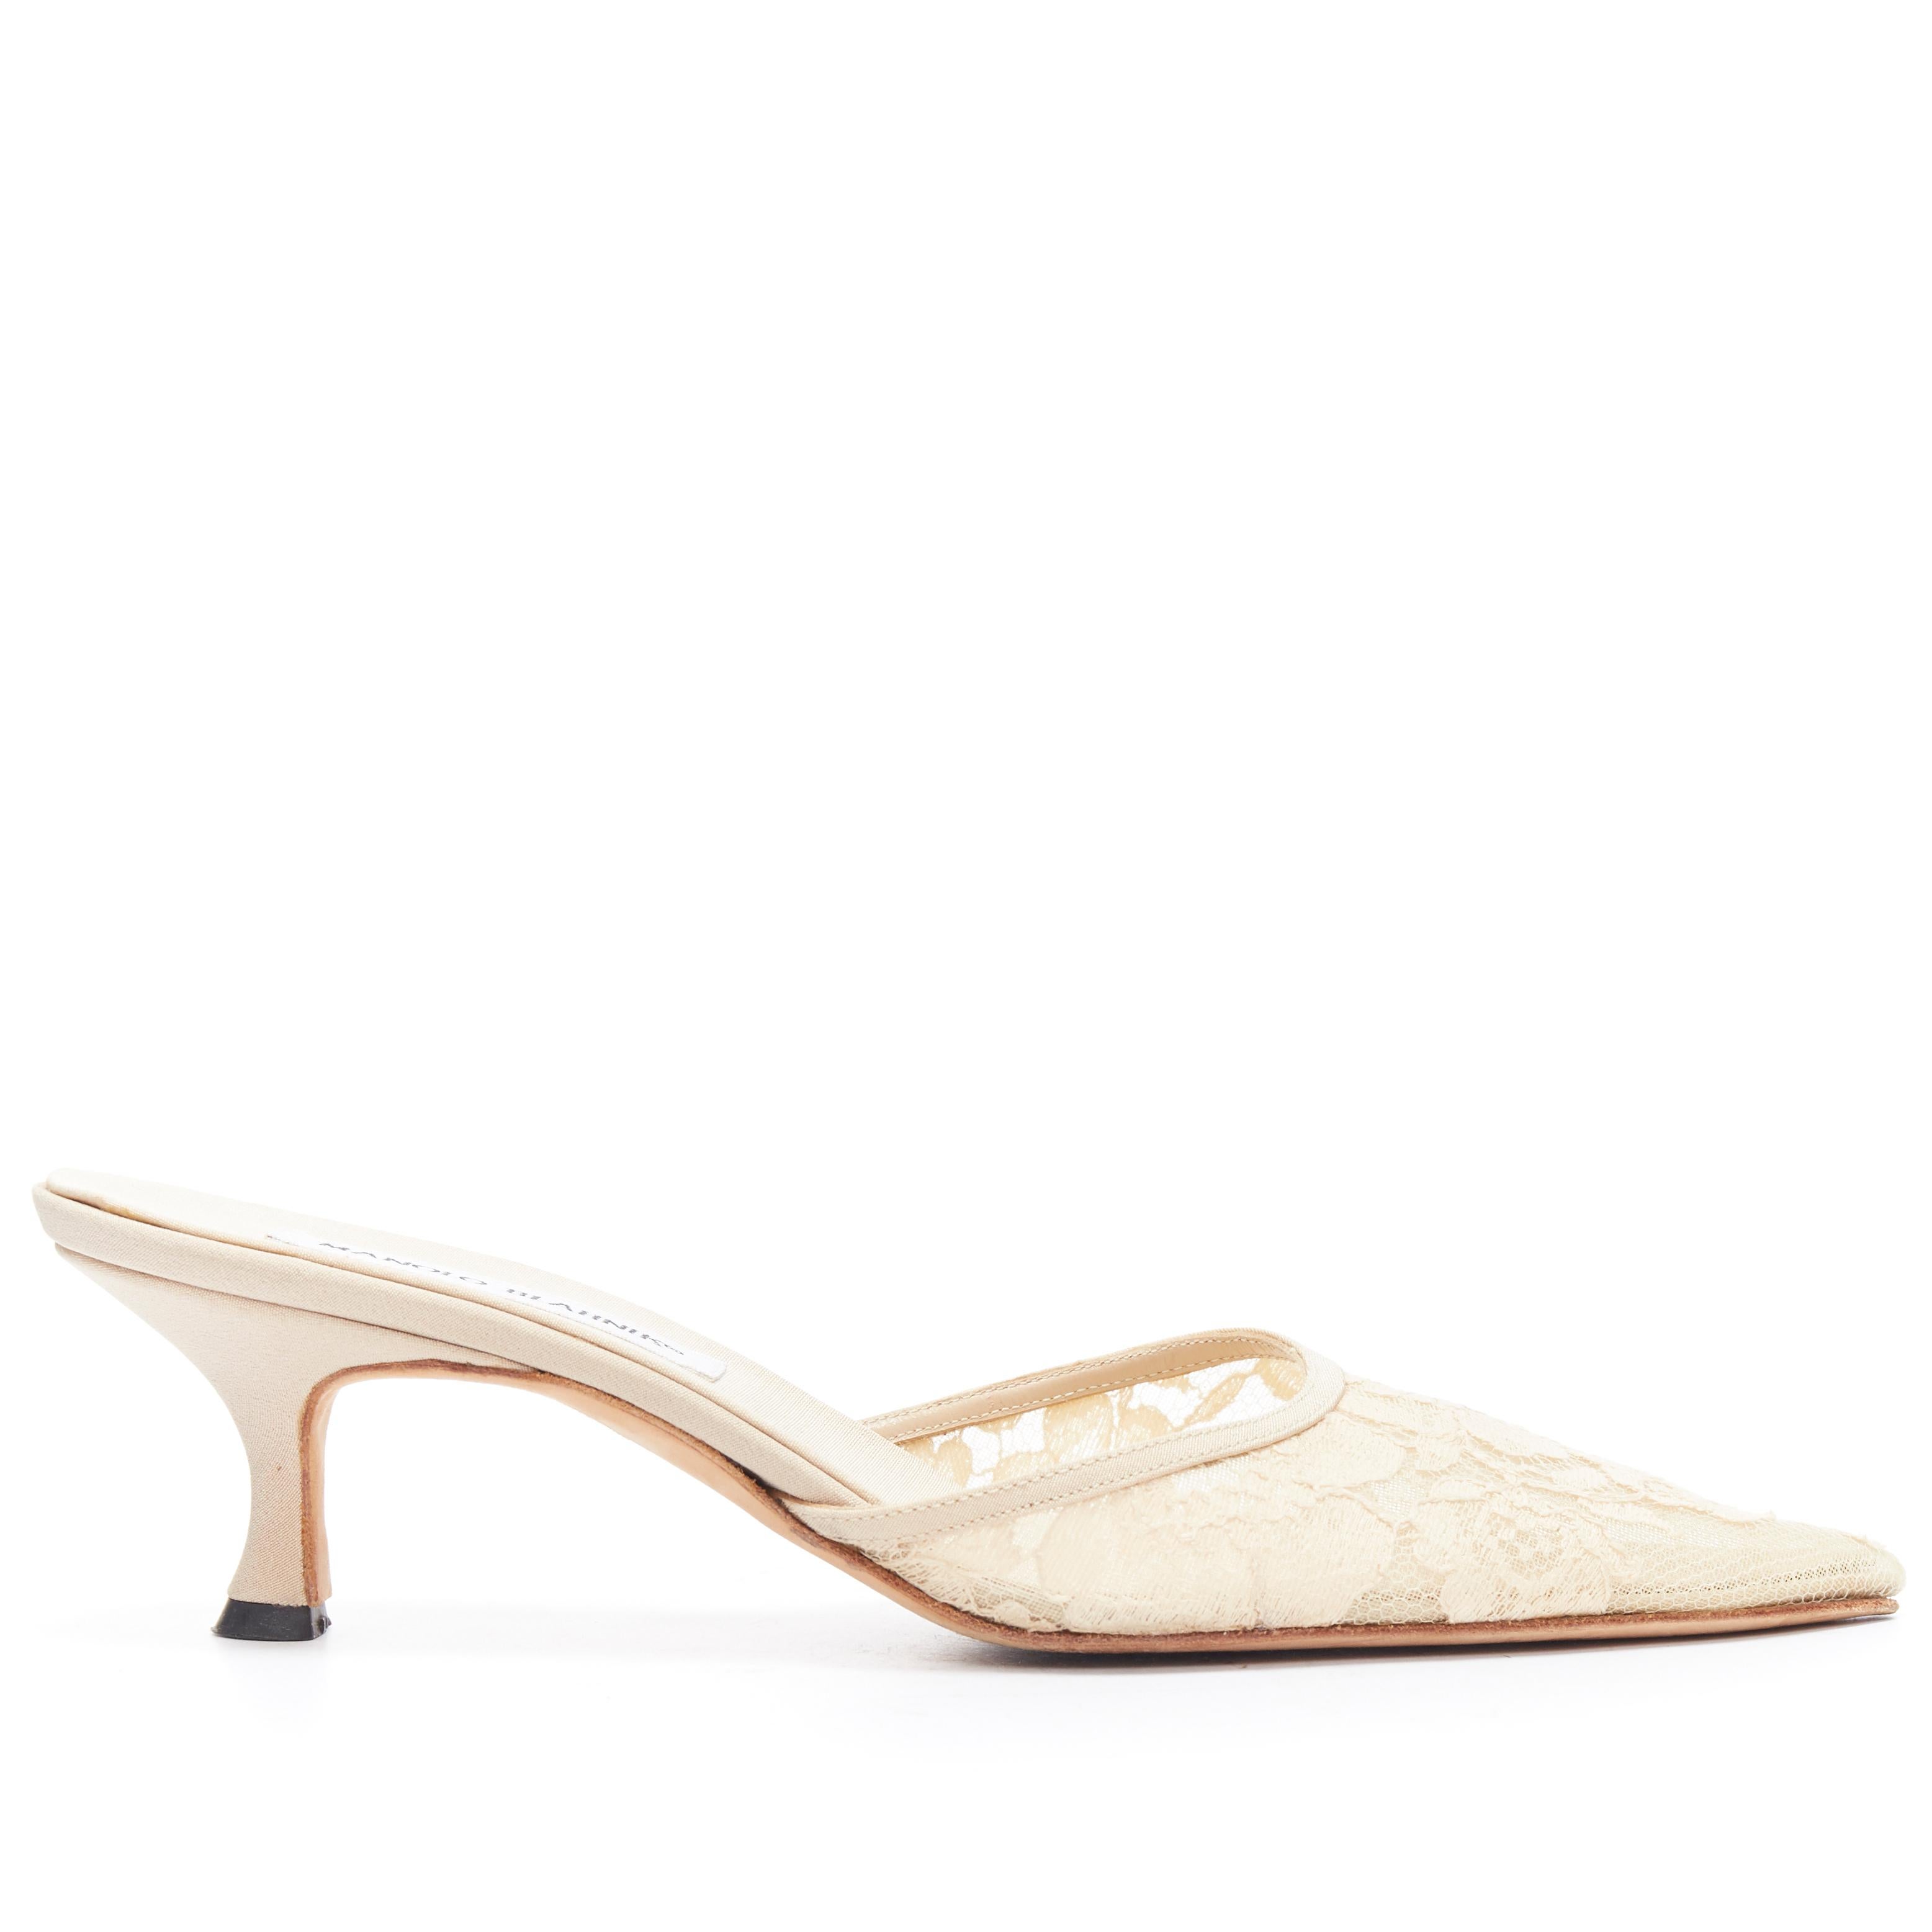 MANOLO BLAHNIK nude beige floral applique mesh point toe mule mid heel EU38
Reference: CC/ASCW00270 
Brand: Manolo Blahnik 
Model: Lace pump 
Material: Fabric 
Color: Beige 
Pattern: Solid 
Extra Detail: Floral lace applique on mesh. Pointed toe.